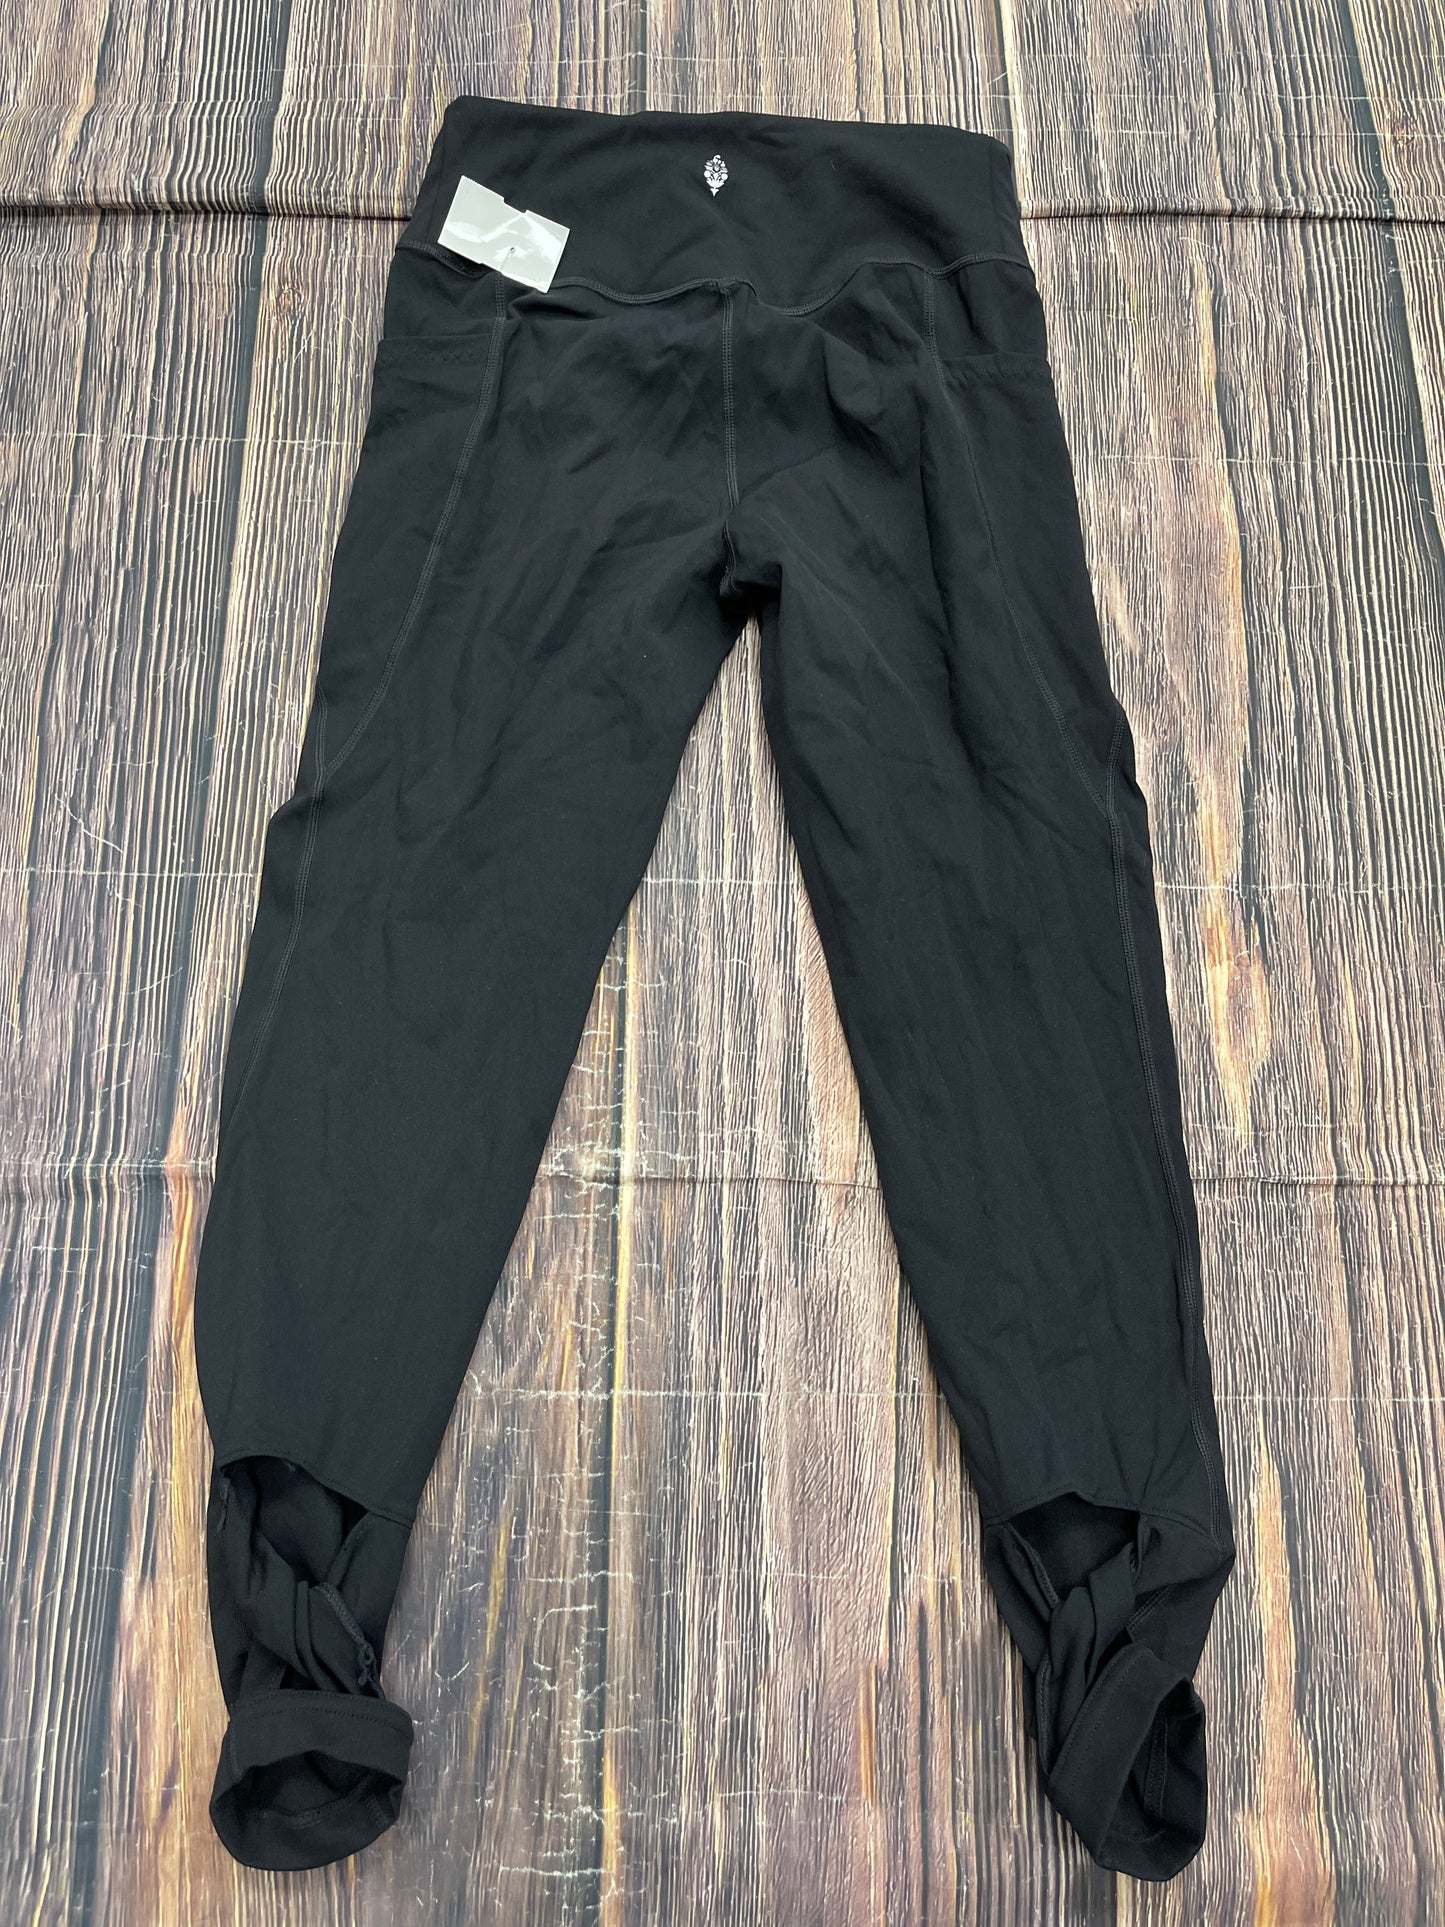 Athletic Leggings By Free People  Size: S